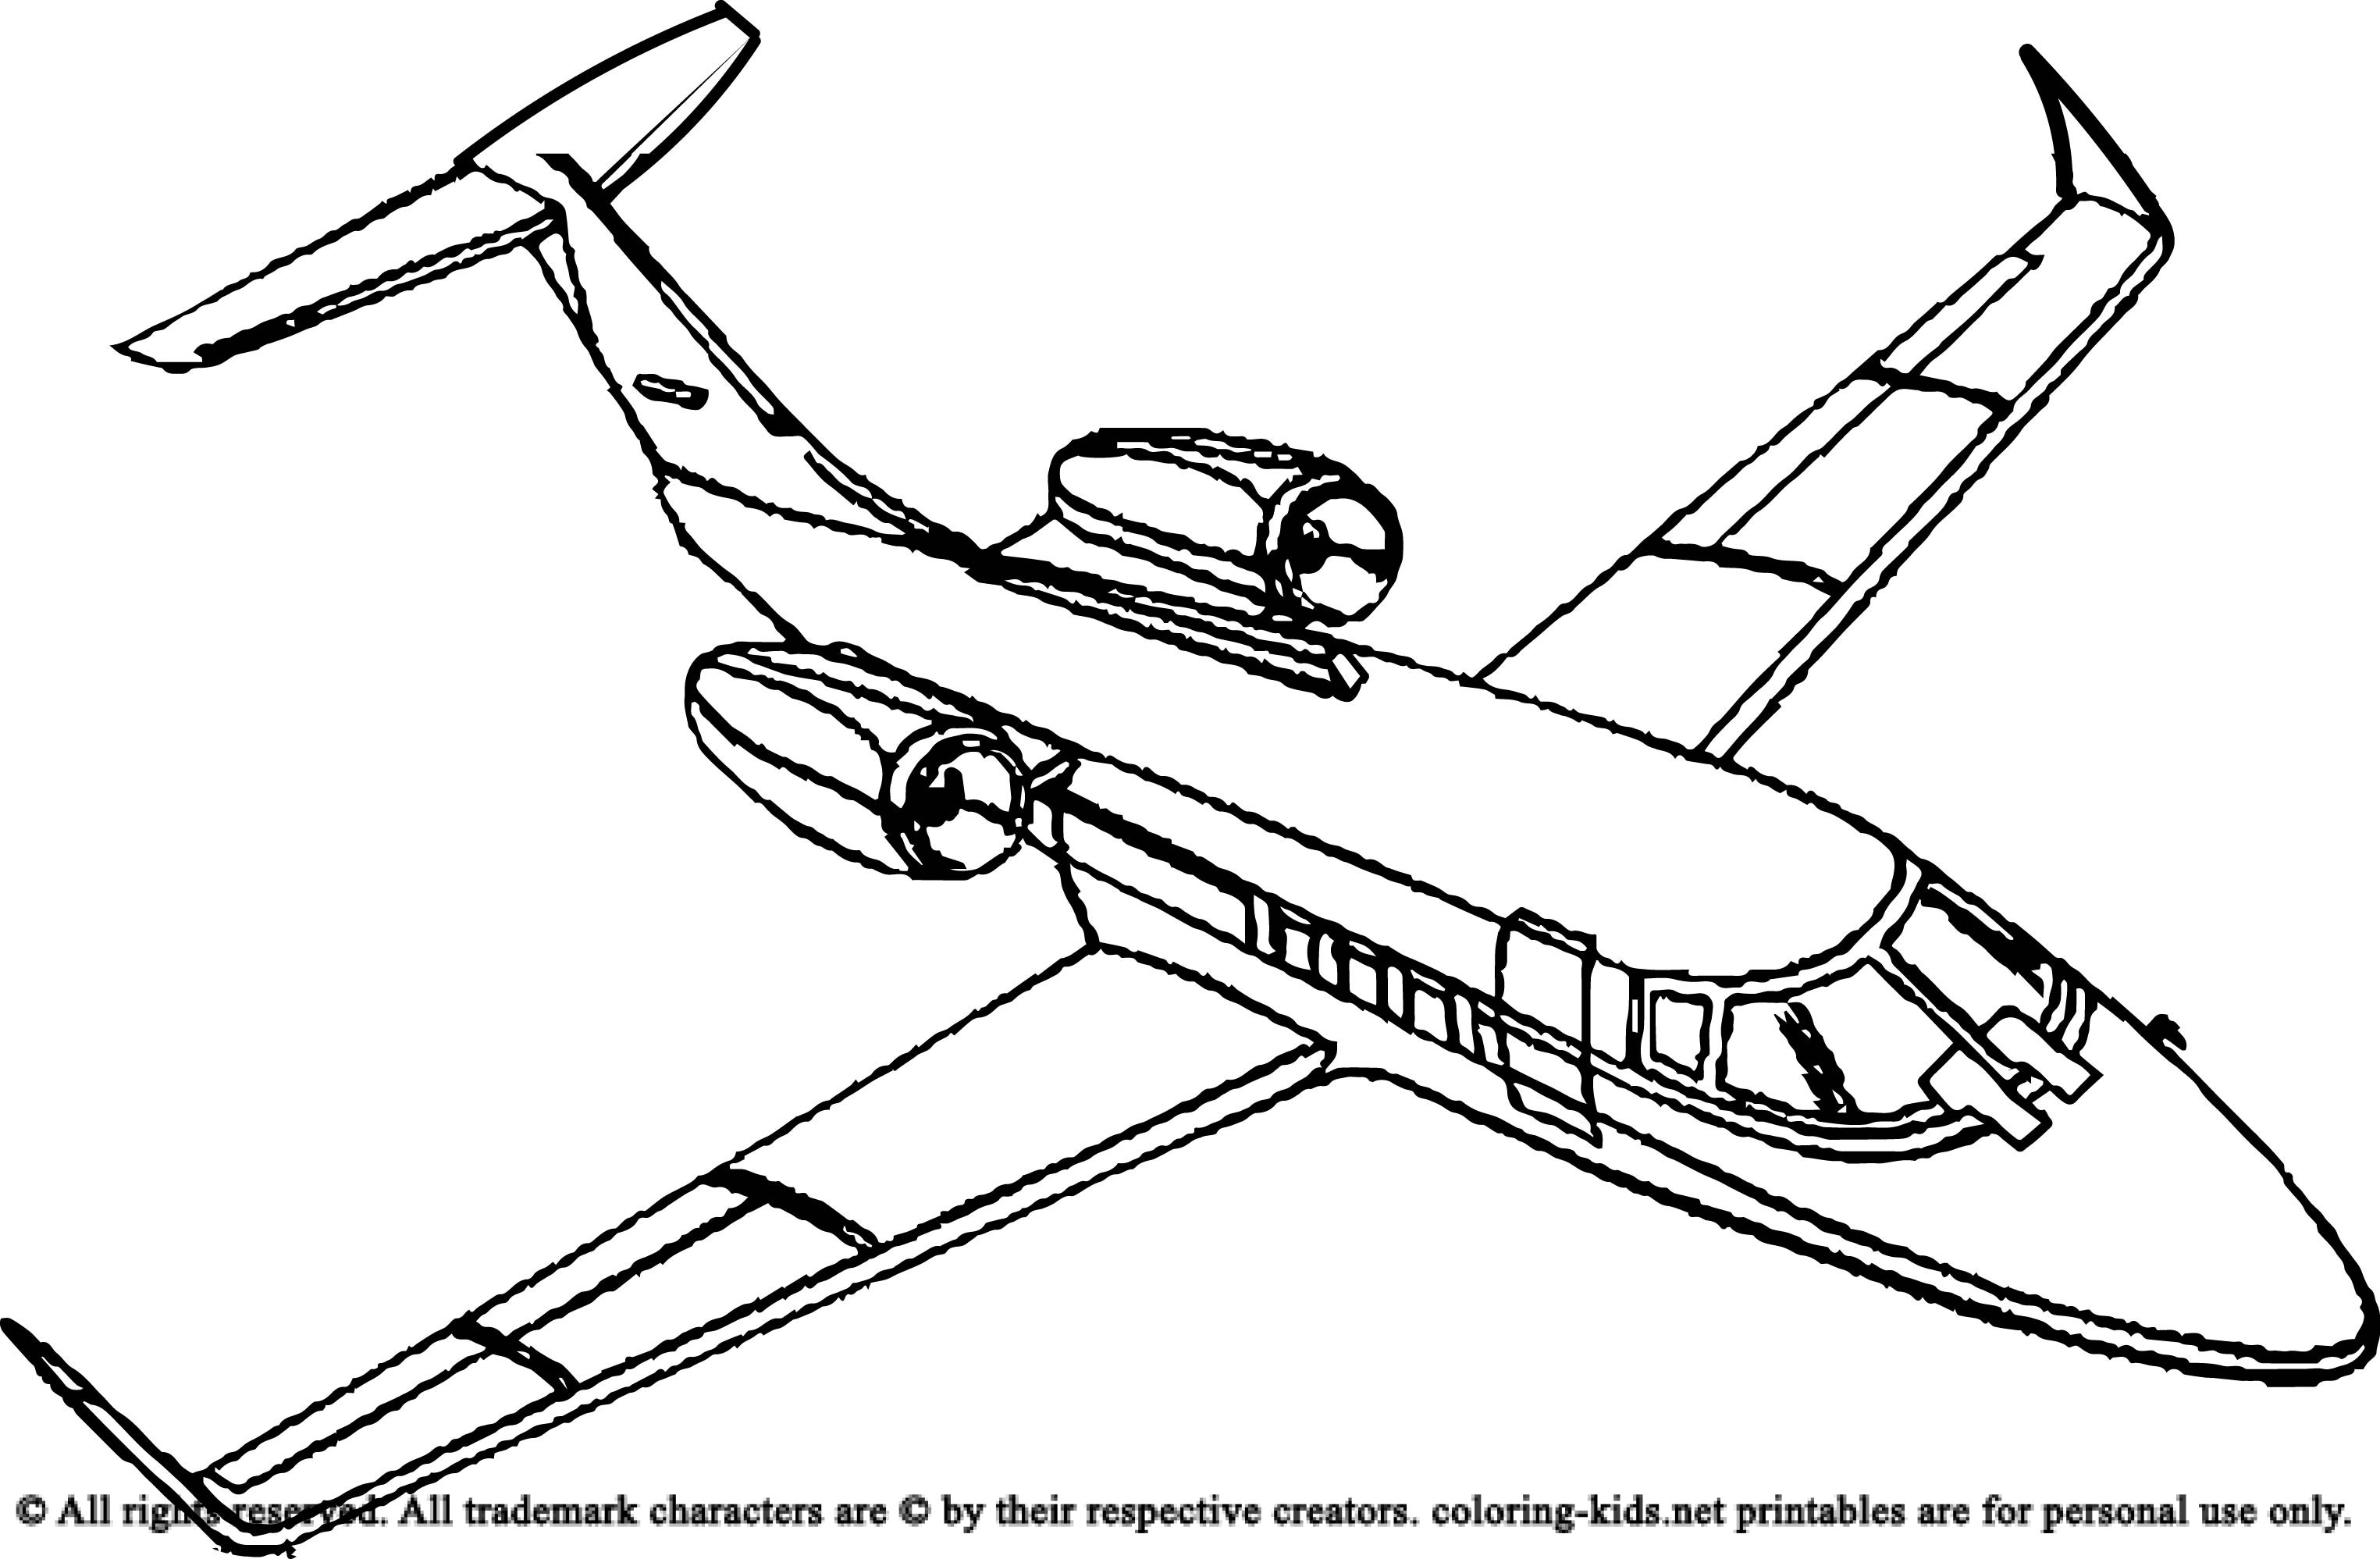 302 Cute Lego Jet Coloring Pages with Animal character